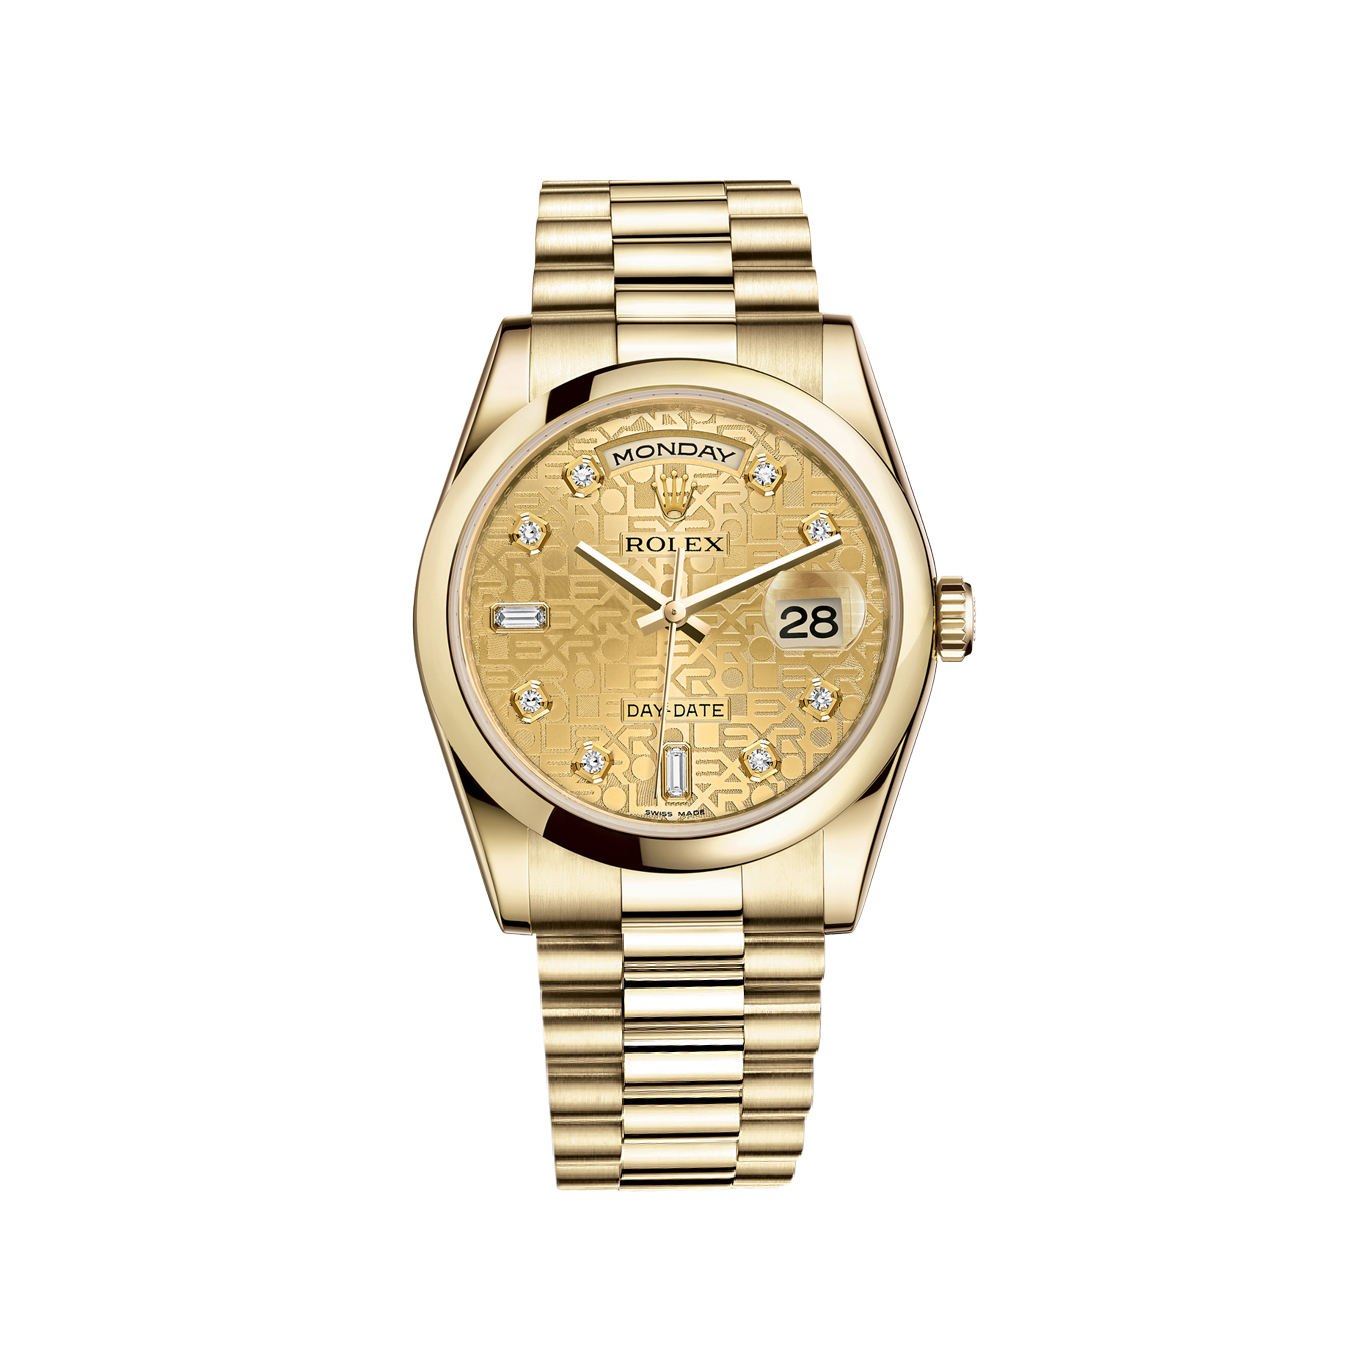 Day-Date 36 118208 Gold Watch (Champagne Jubilee Design Set with Diamonds)